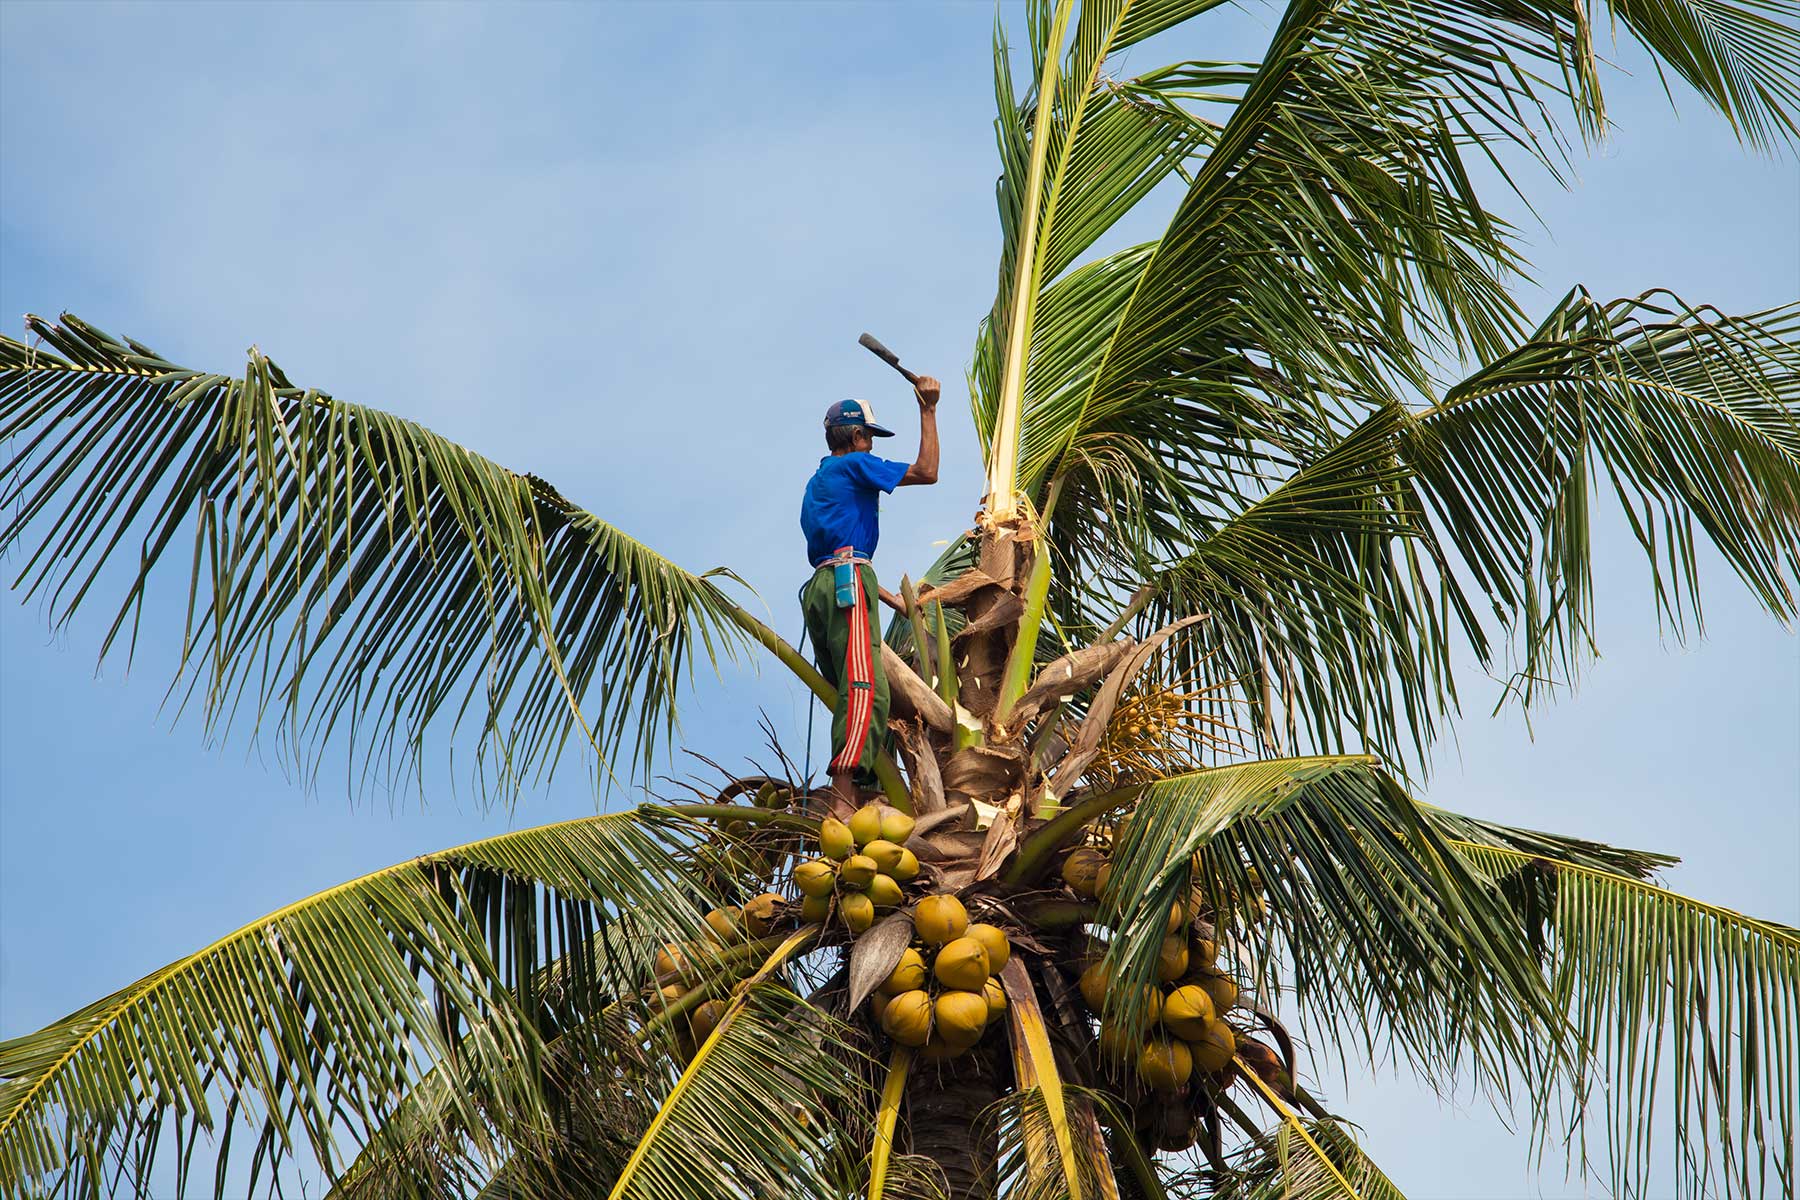 Most coconuts are harvested by small-scale farmers by hand. Young coconuts are green, triangular and about the size of a head. They primarily contain coconut water. The riper fruits later provide the basis for coconut milk and coconut cream, as well as coconut flakes and coconut flour. (Image: © paulprescott72/iStock.com)